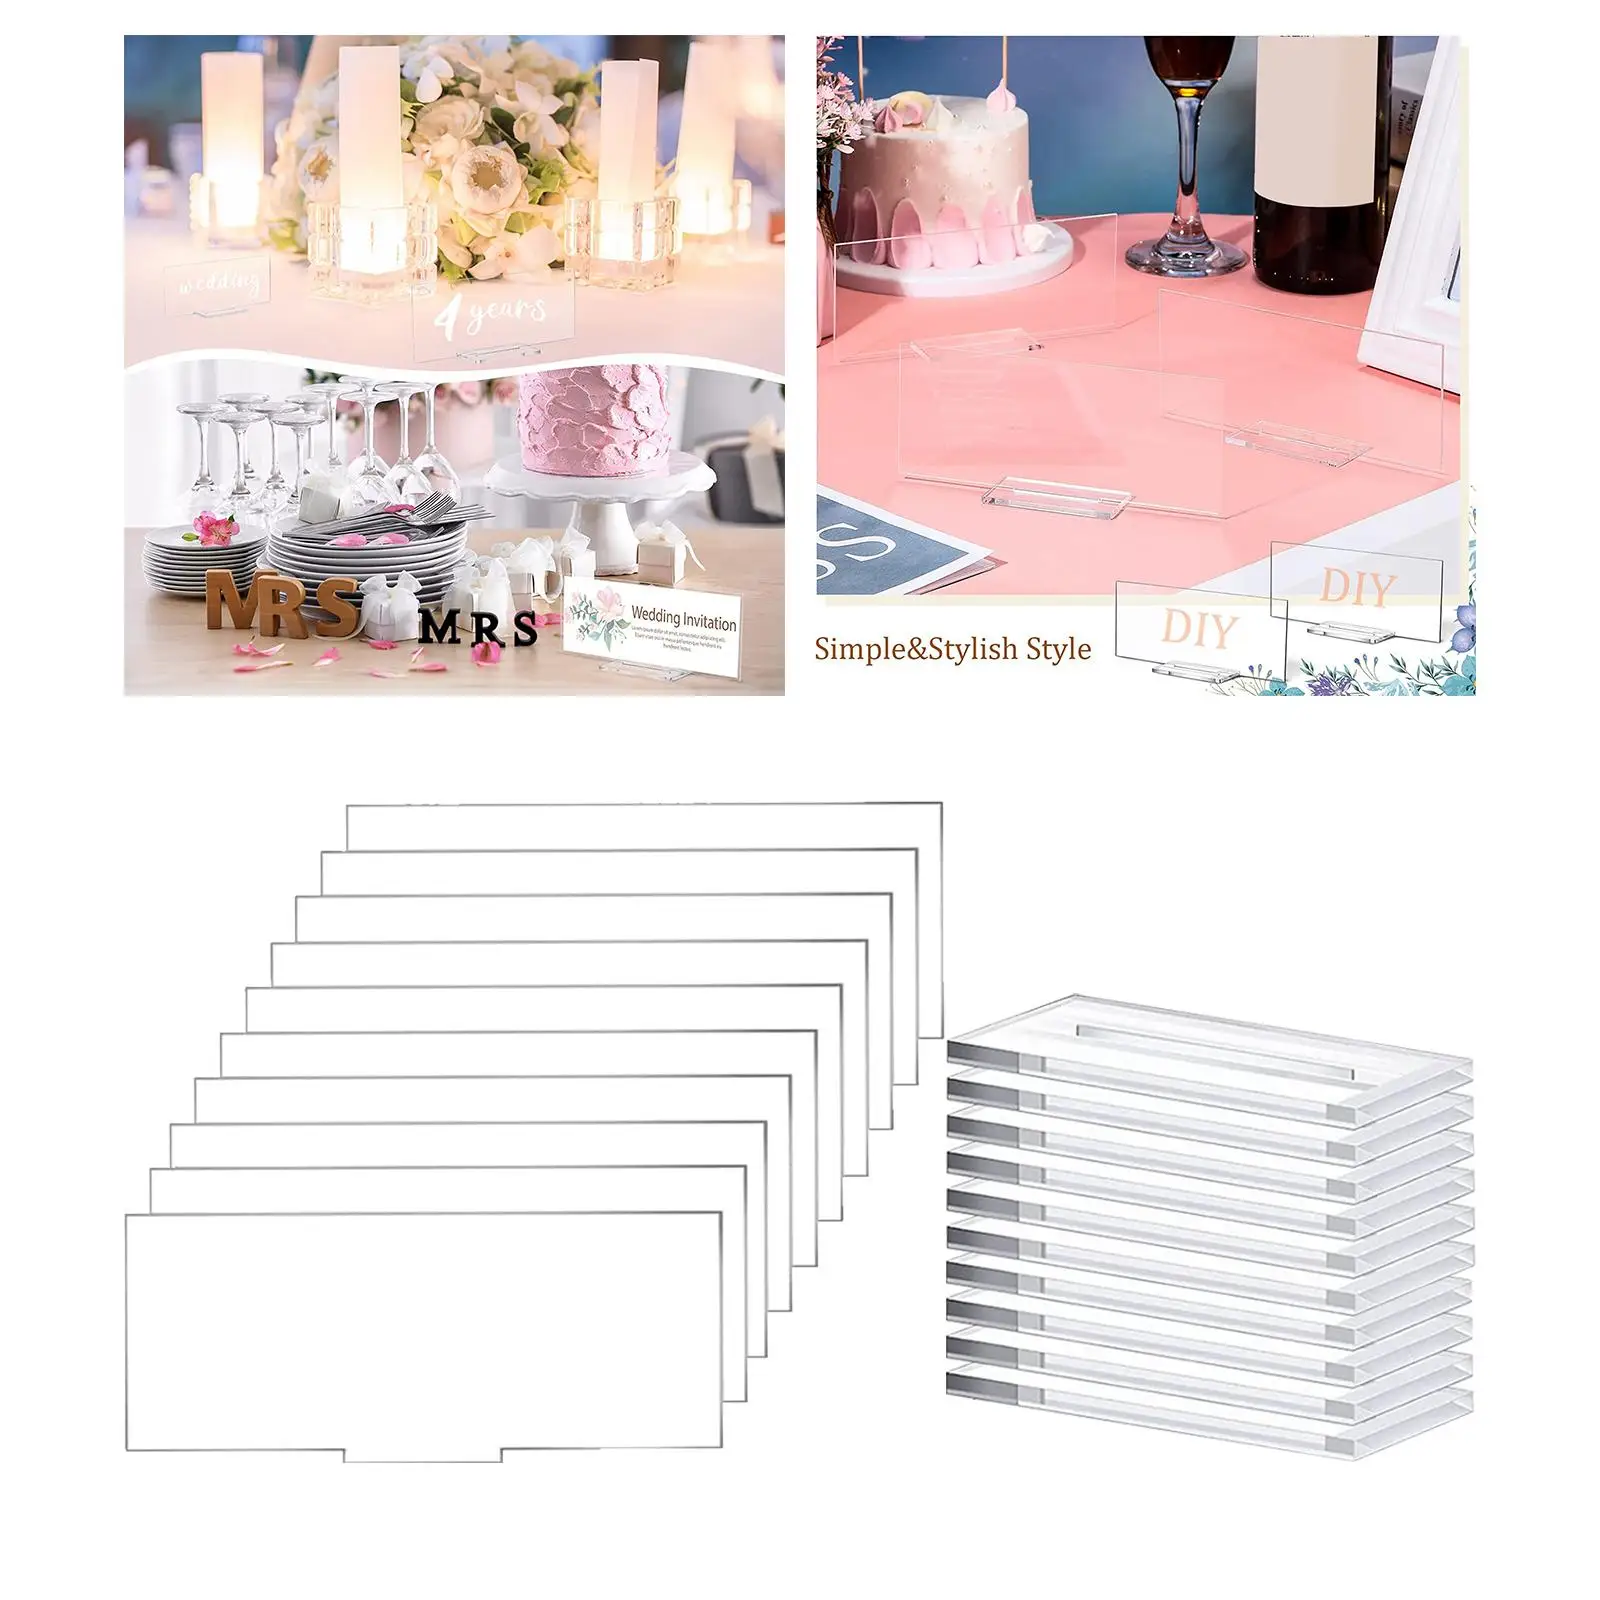 10x Acrylic Place Cards Name Signs Cards Seating Cards for Wedding Birthday